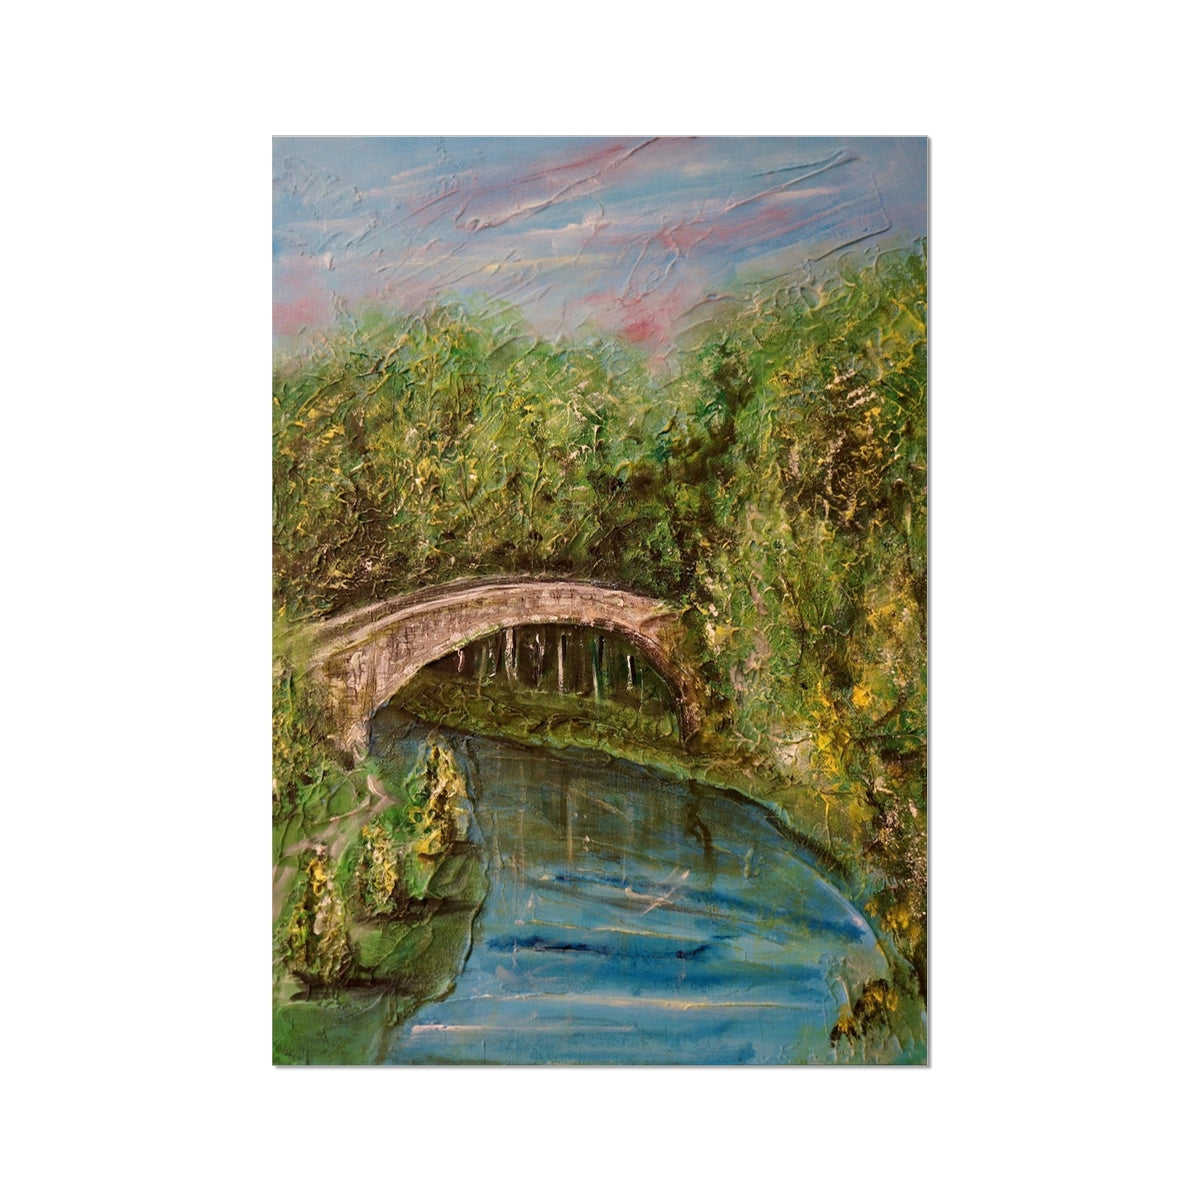 The Brig O Doon Painting | Fine Art Prints From Scotland-Unframed Prints-Historic & Iconic Scotland Art Gallery-A2 Portrait-Paintings, Prints, Homeware, Art Gifts From Scotland By Scottish Artist Kevin Hunter